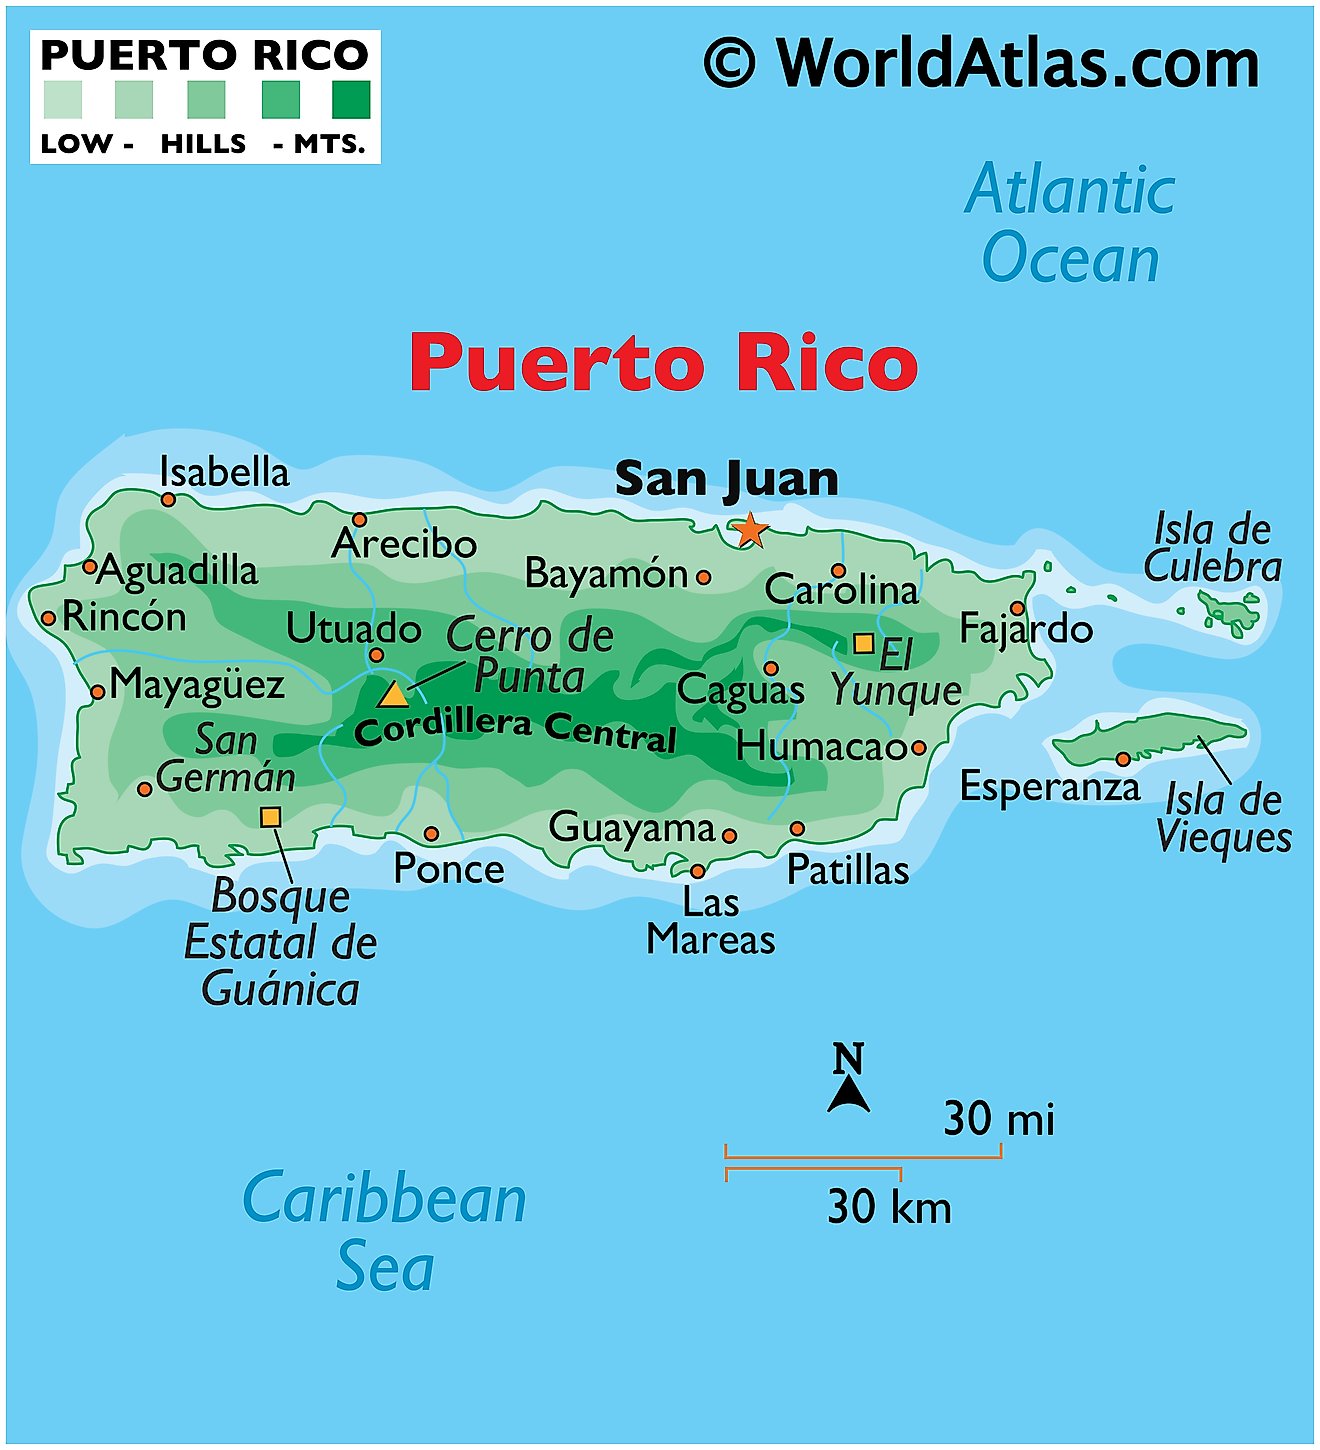 Physical Map of Puerto Rico showing relief, islands, mountain ranges, important settlements, etc.